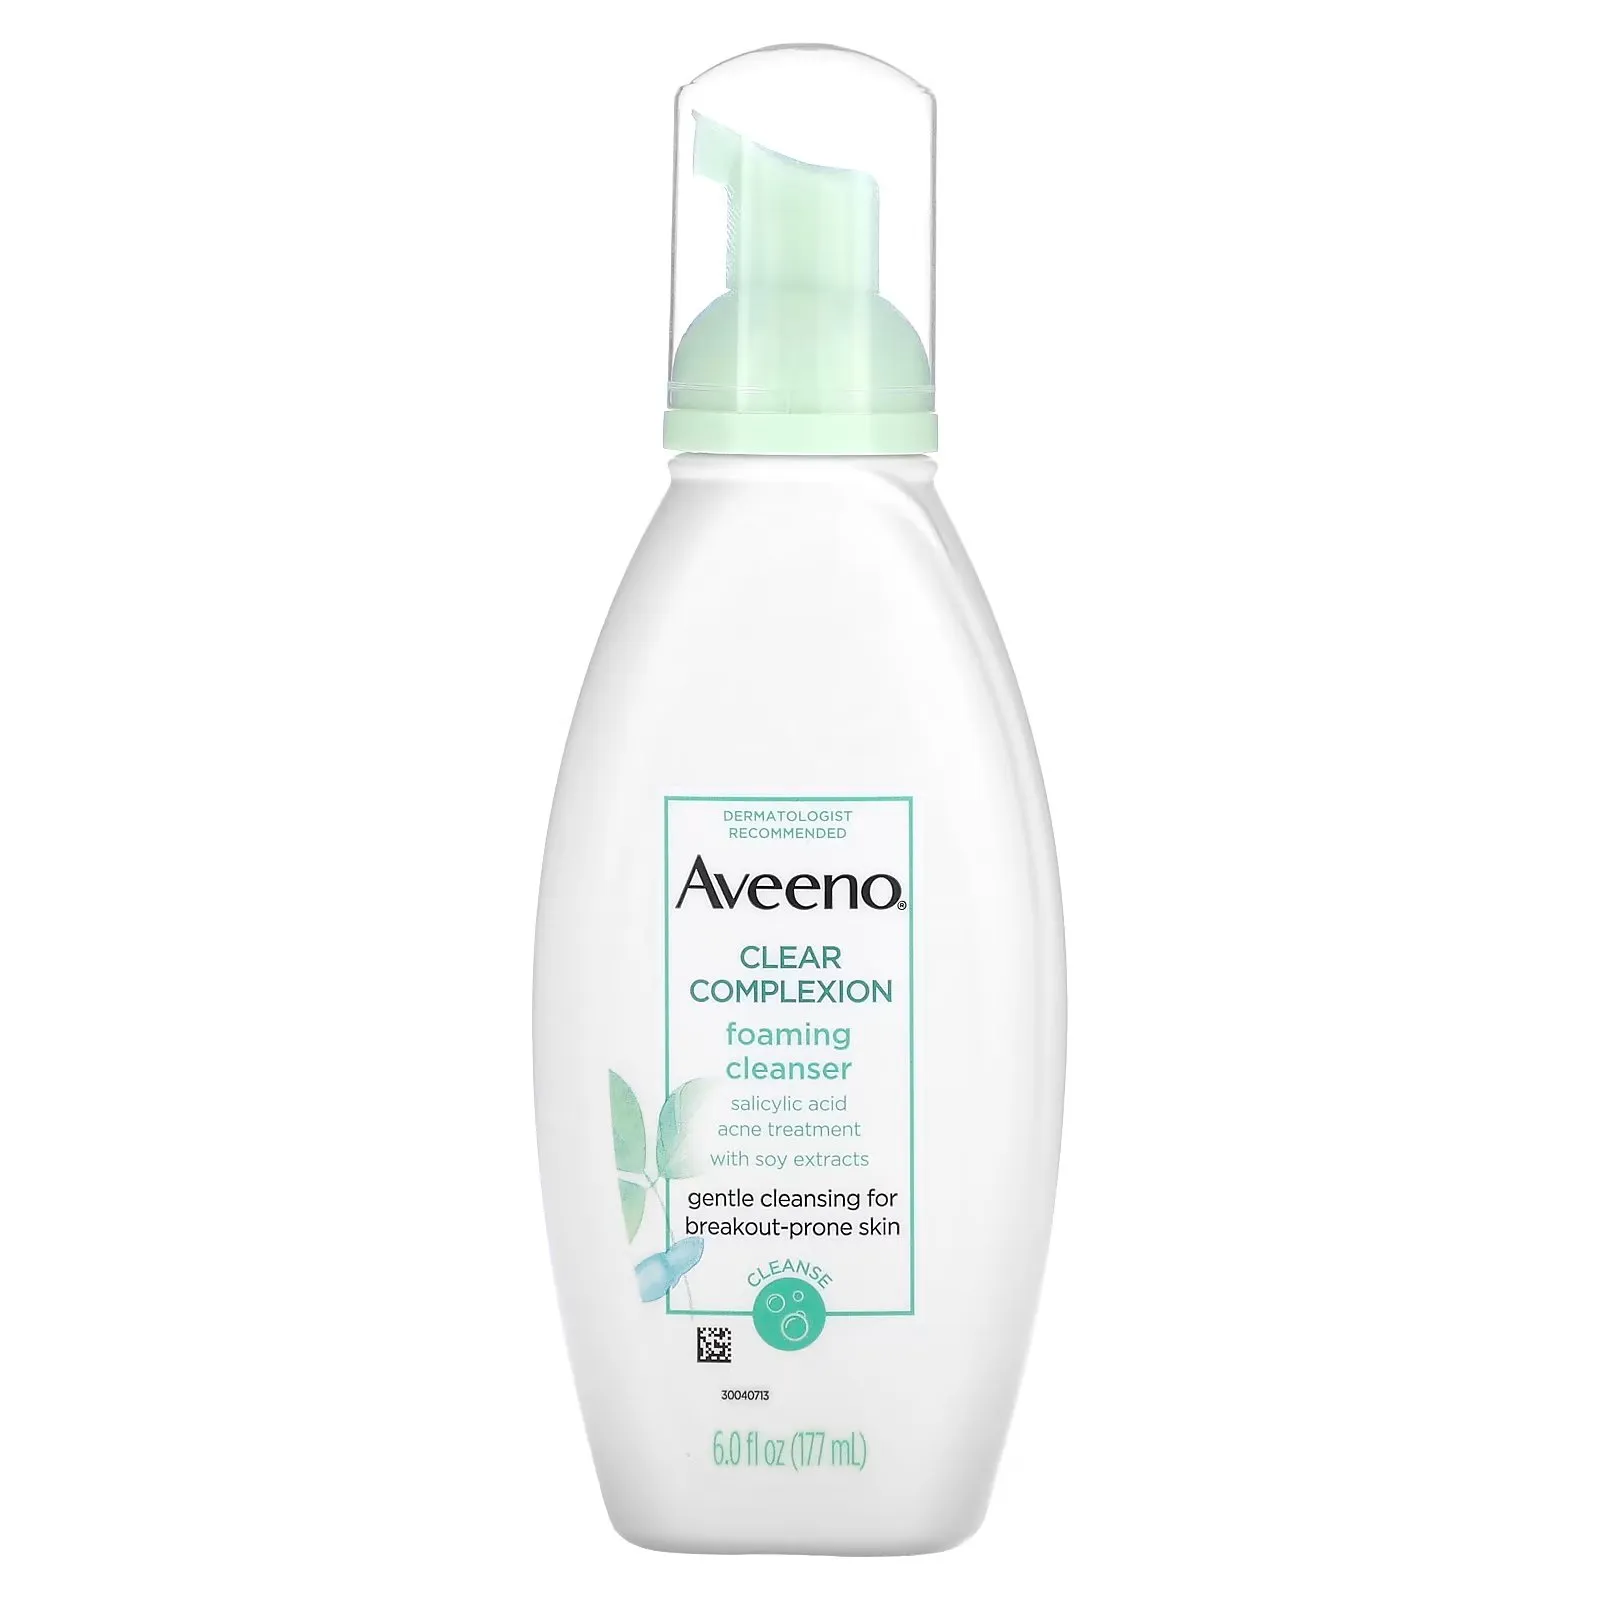 FEMMENORDIC's choice in the Aveeno vs CeraVe for acne comparison, the Aveeno Clear Complexion Foaming Facial Cleanser